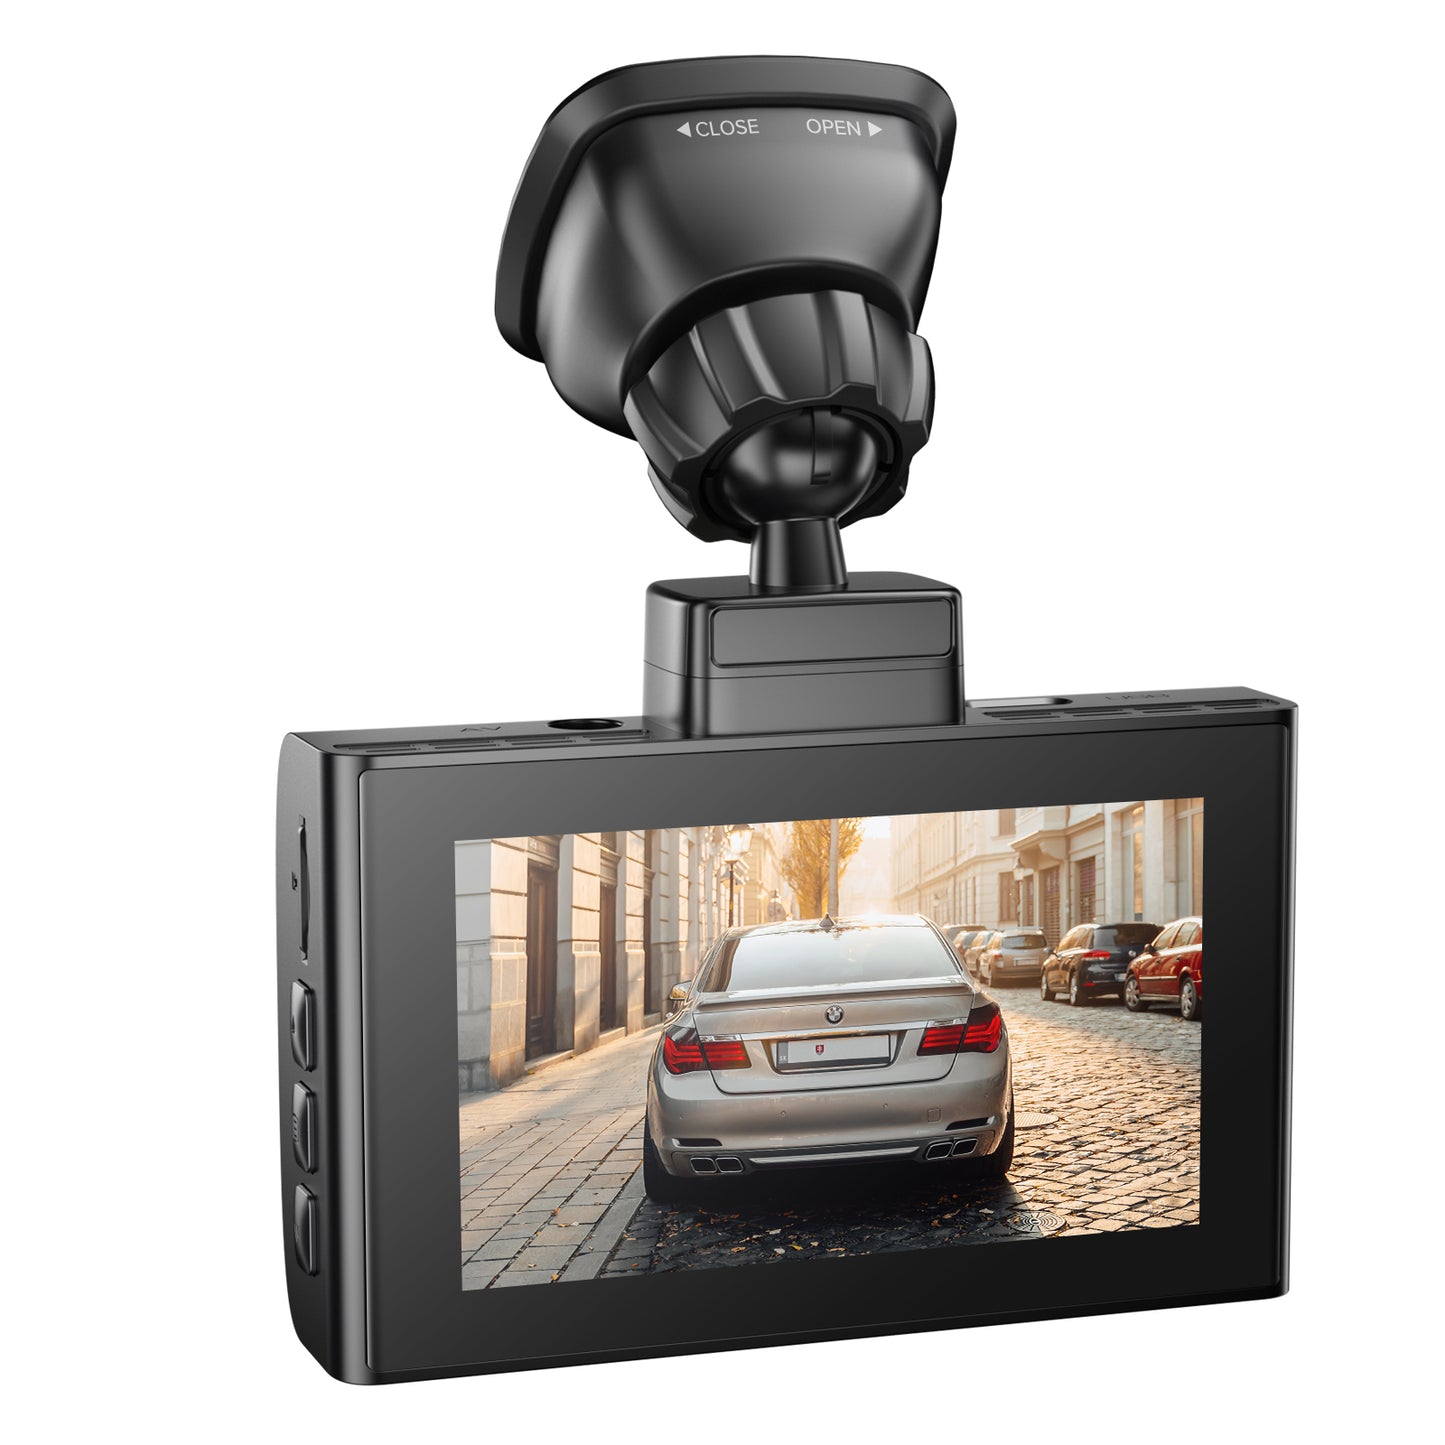 LINGDU LD02 Mirror Dash Cam - The 5K Dual-Channel Car Camera with Night Vision and 24H Parking Mode